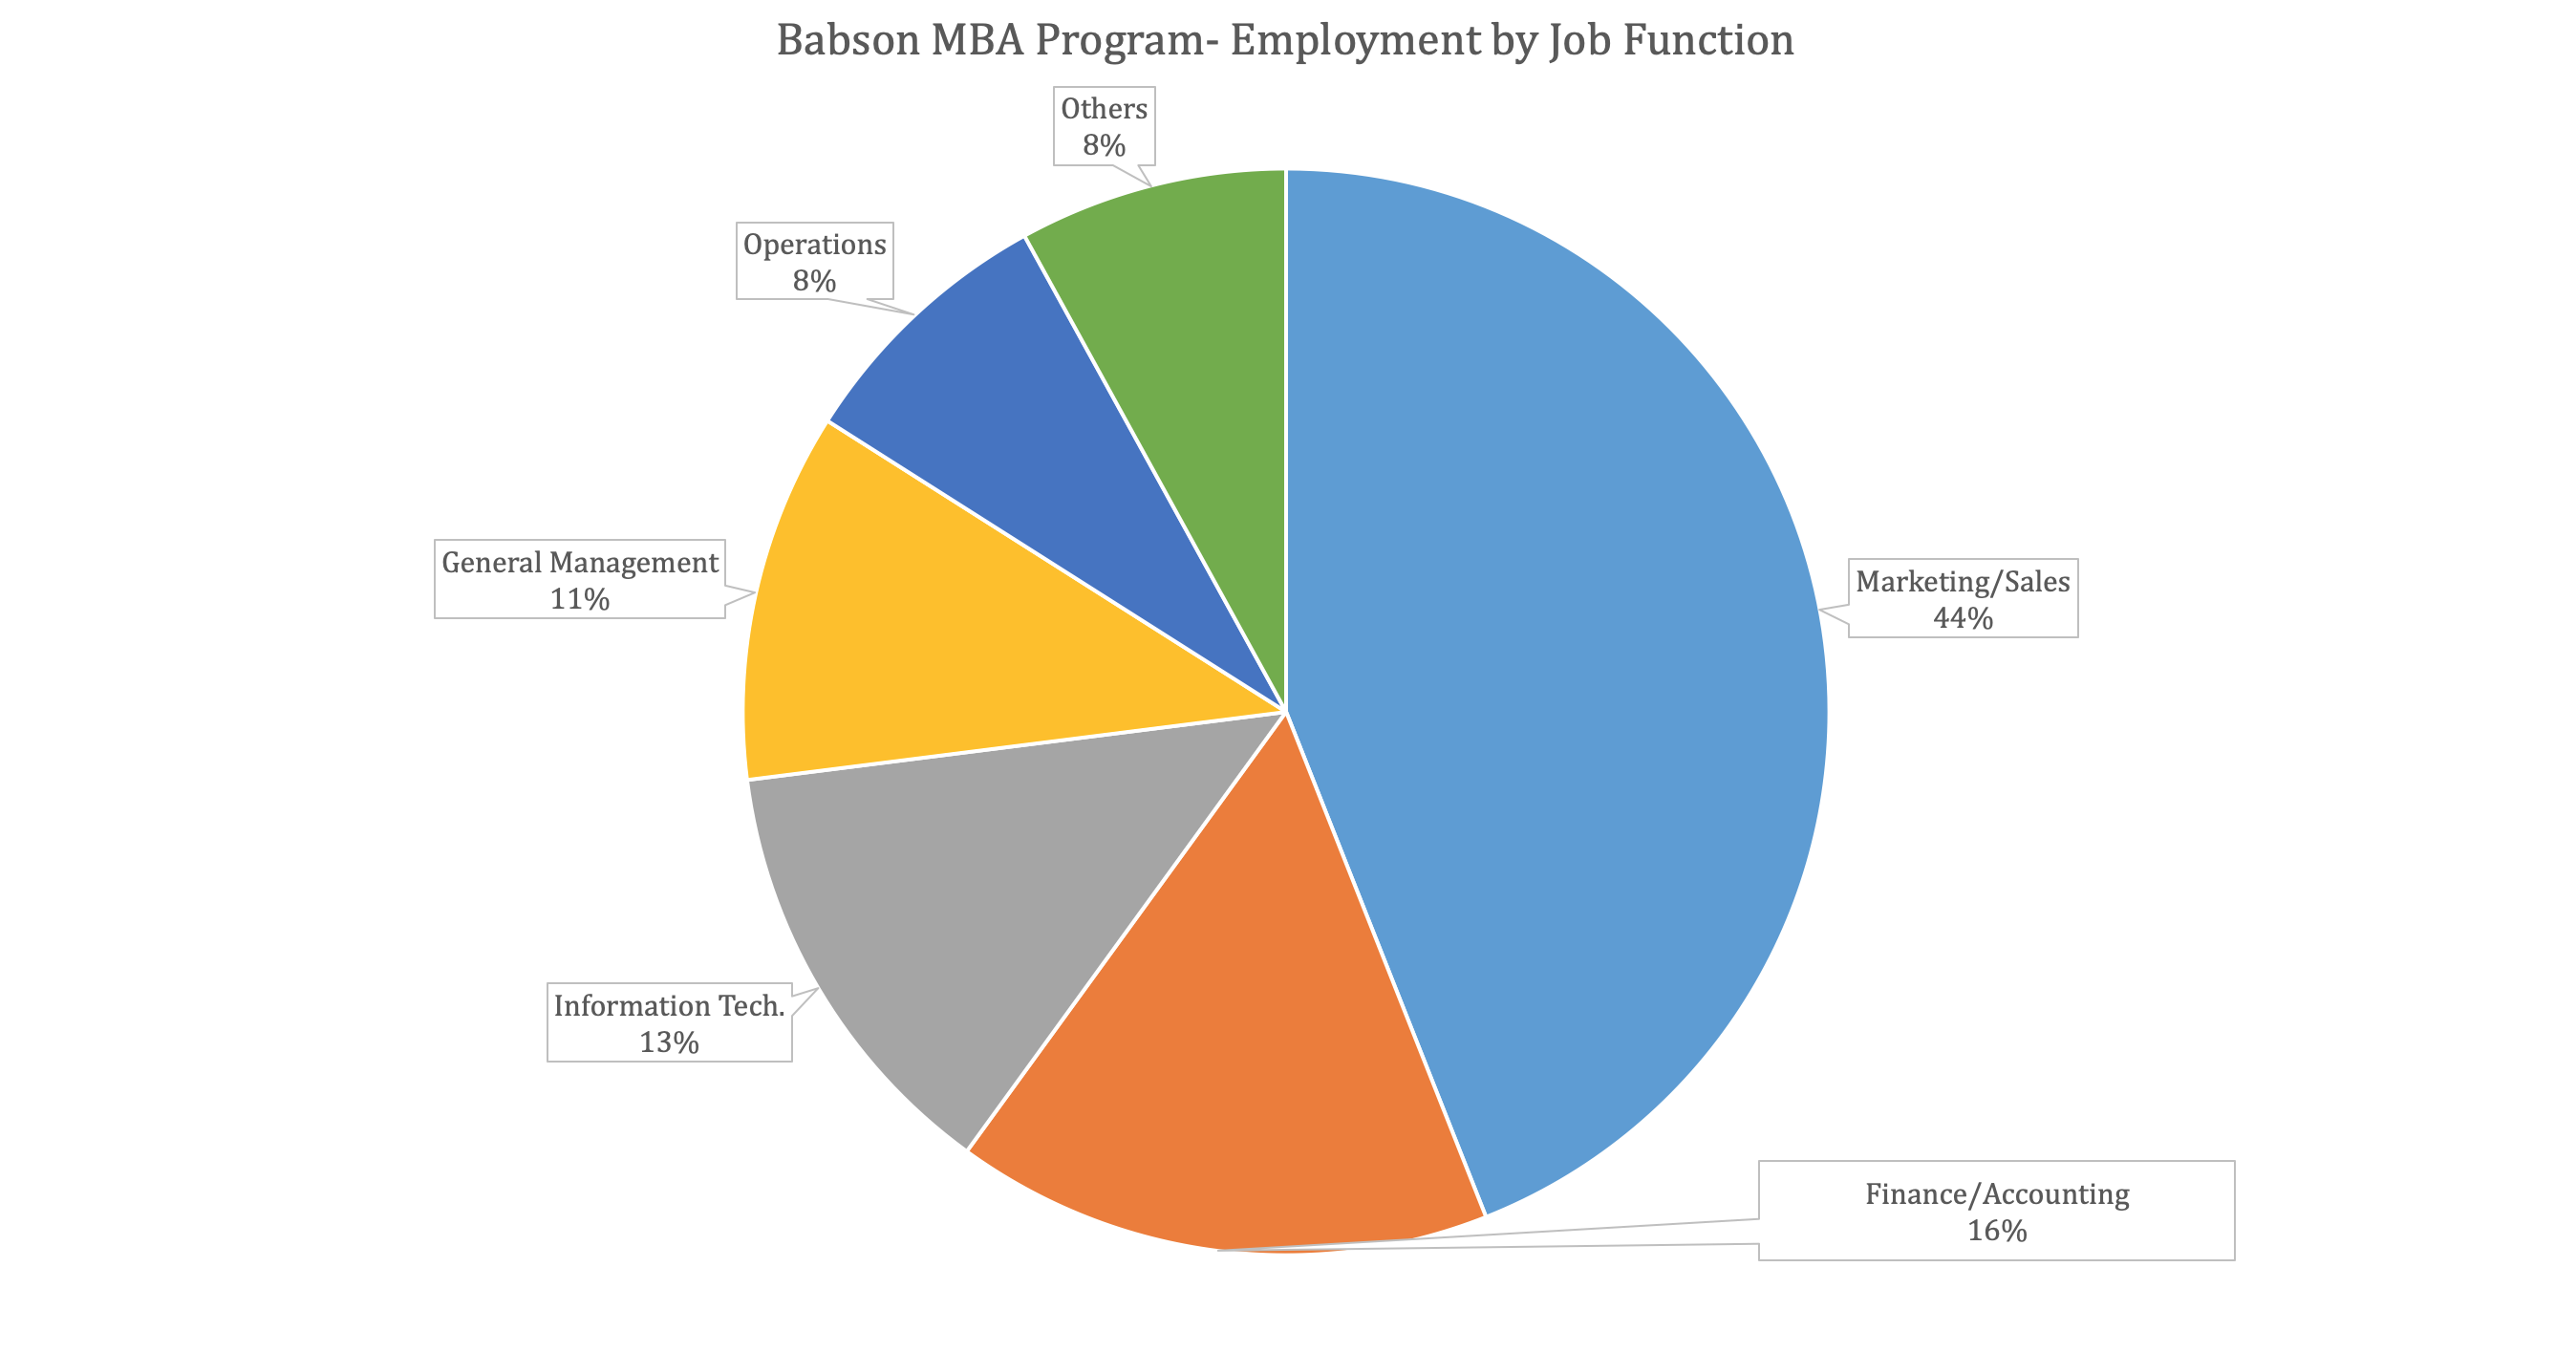 Babson FW Olin GSB - Babson MBA Program - Employment by Job Function